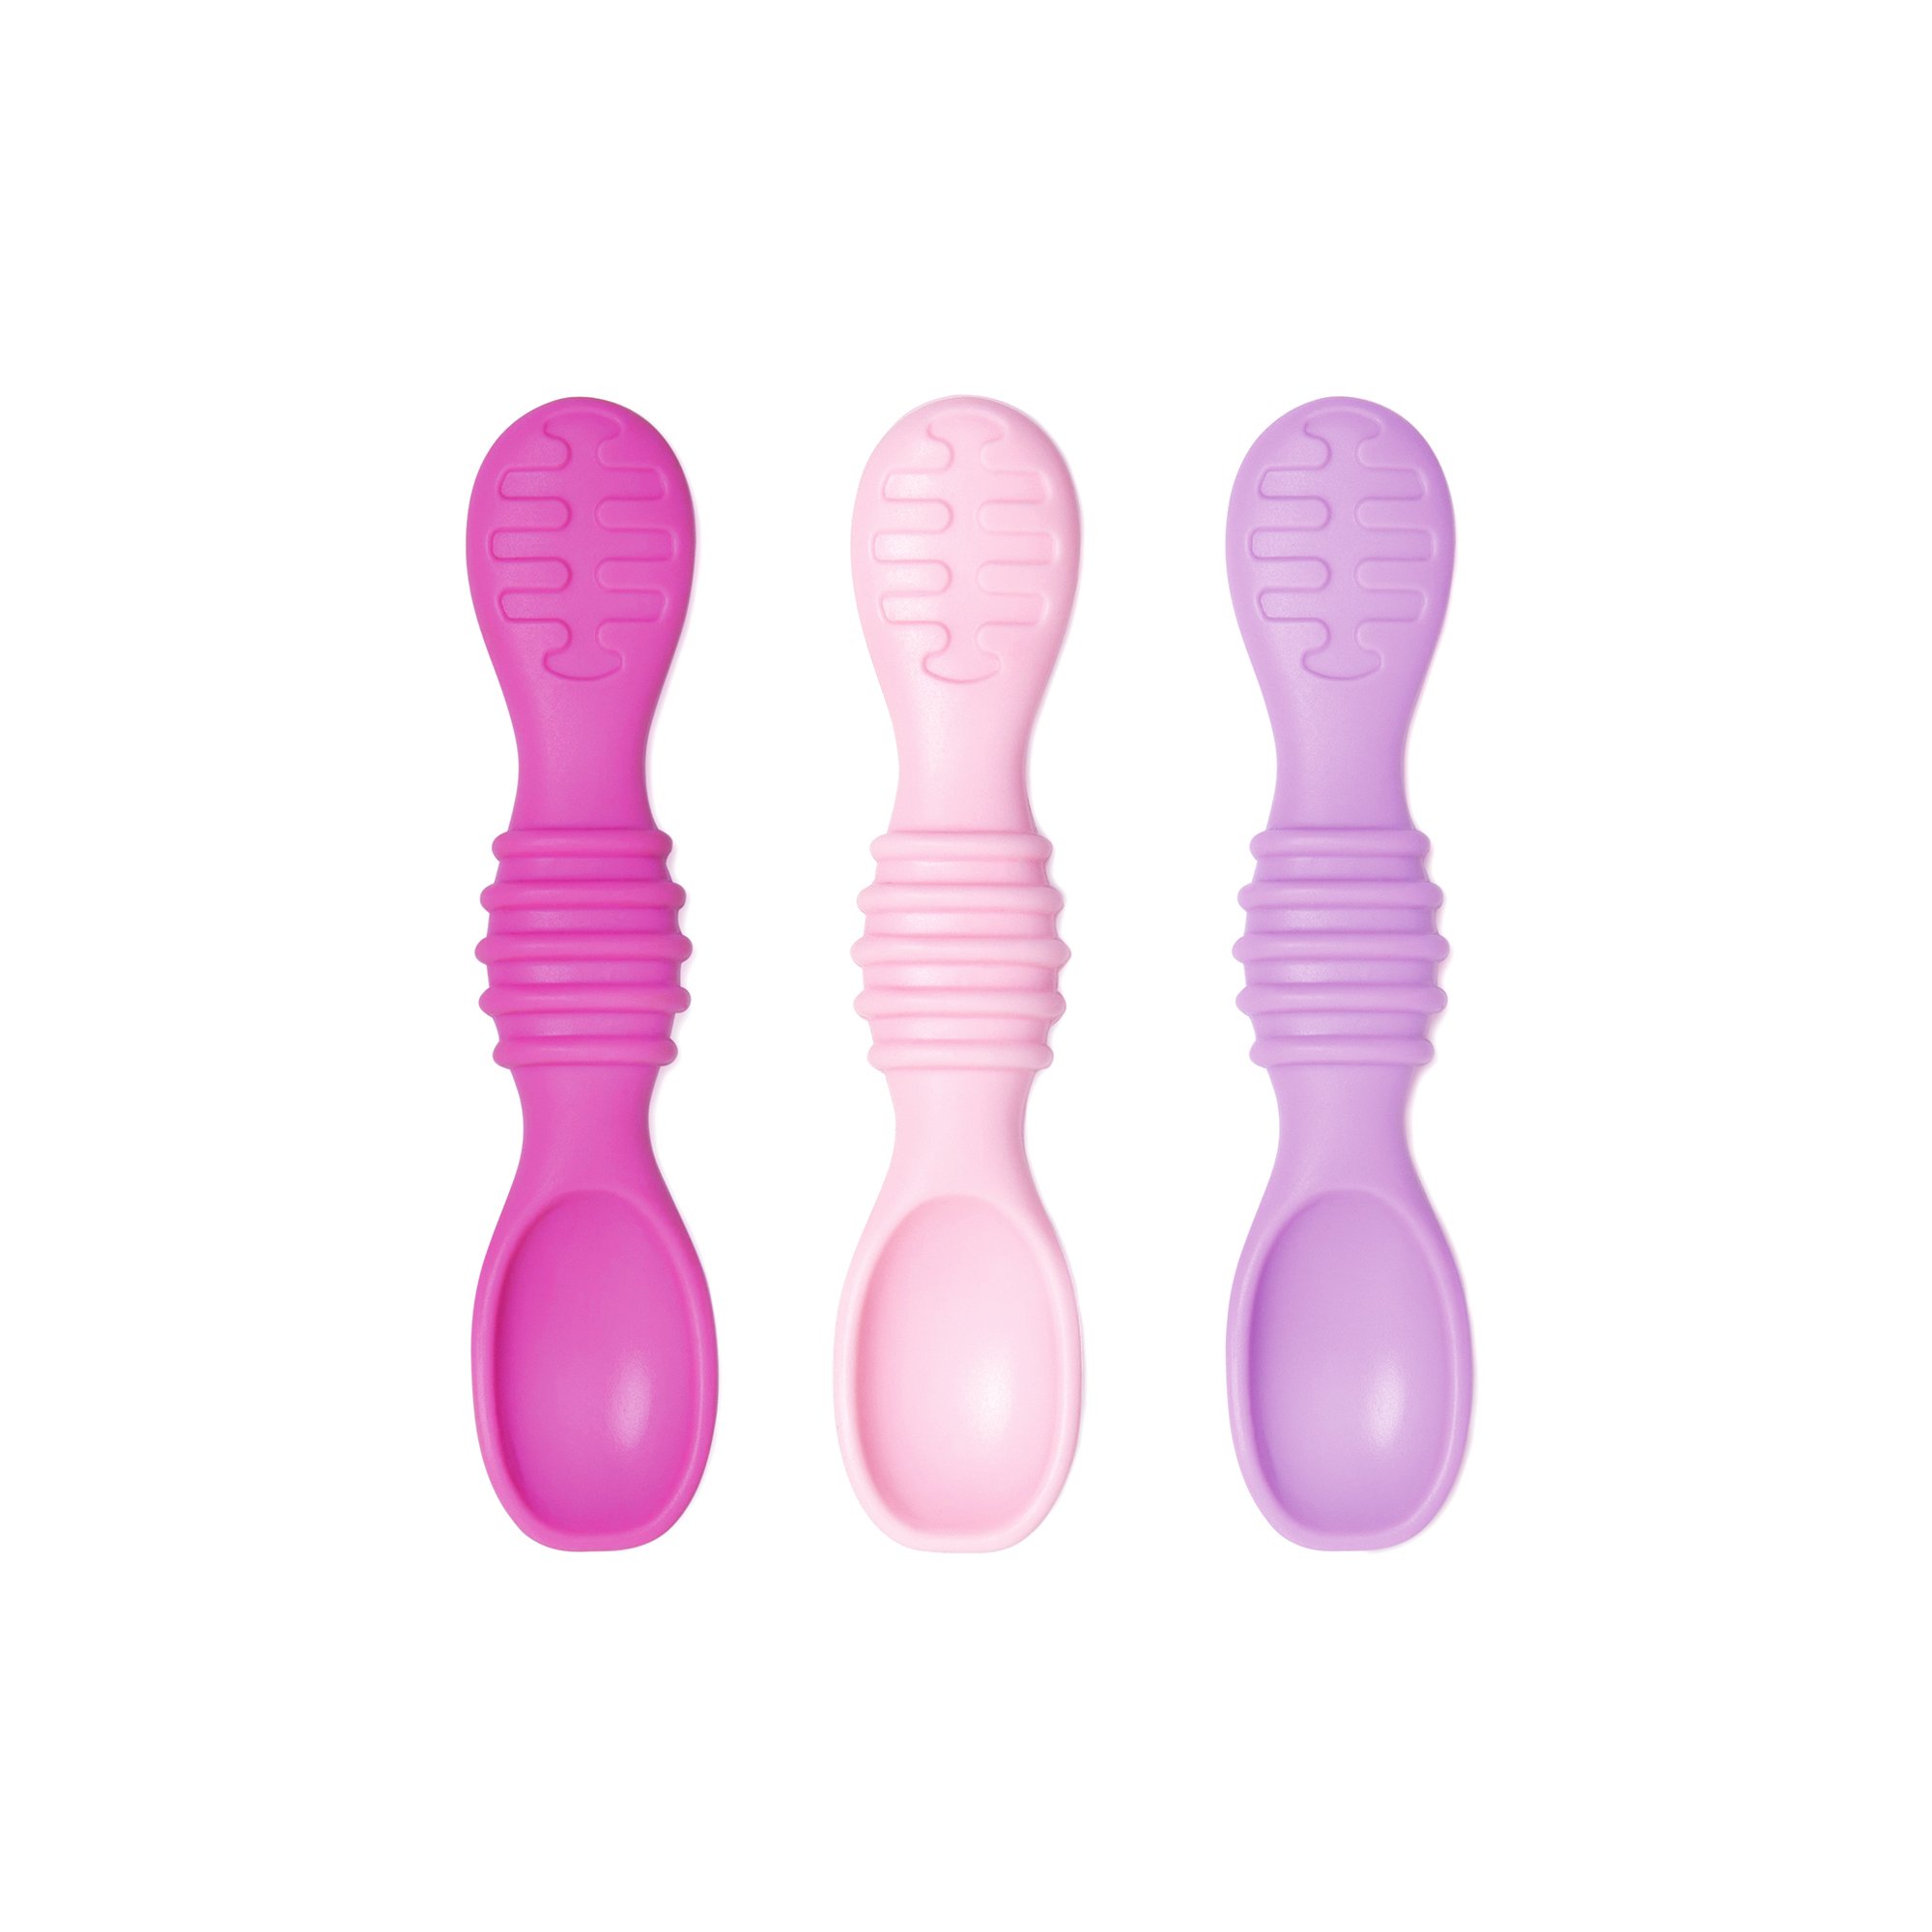  Bumkins Silicone Dipping Spoons  | Lollipop